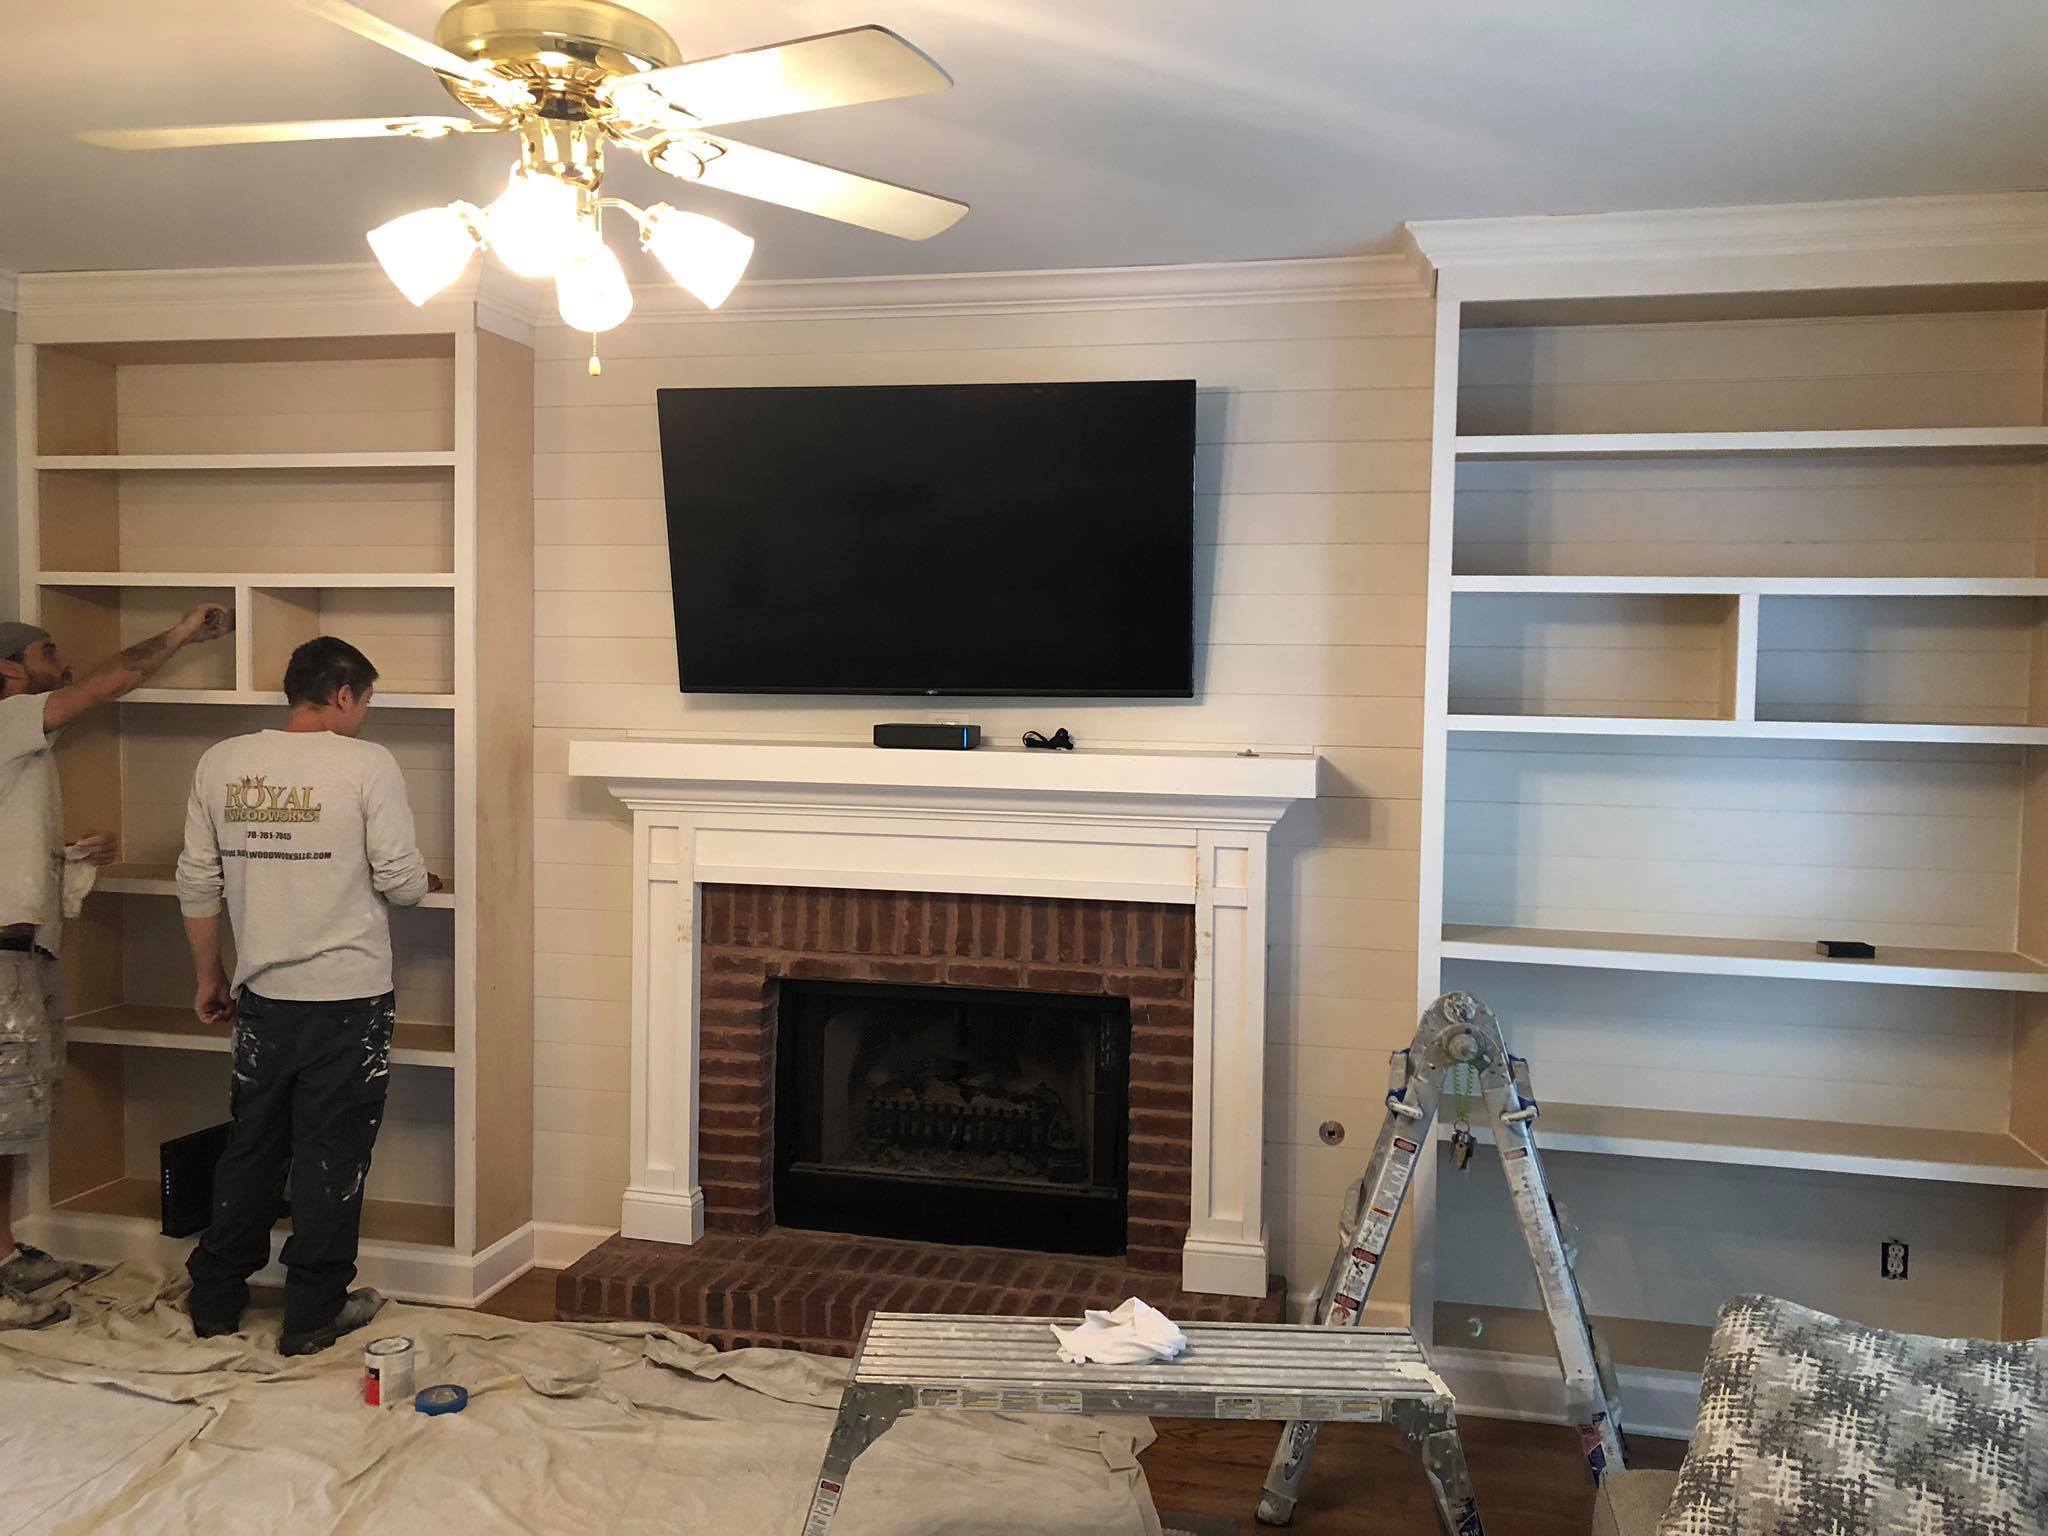 Fireplace Custom Wall High Built in Cabinets Shelves and Trim Painted White Installing 5